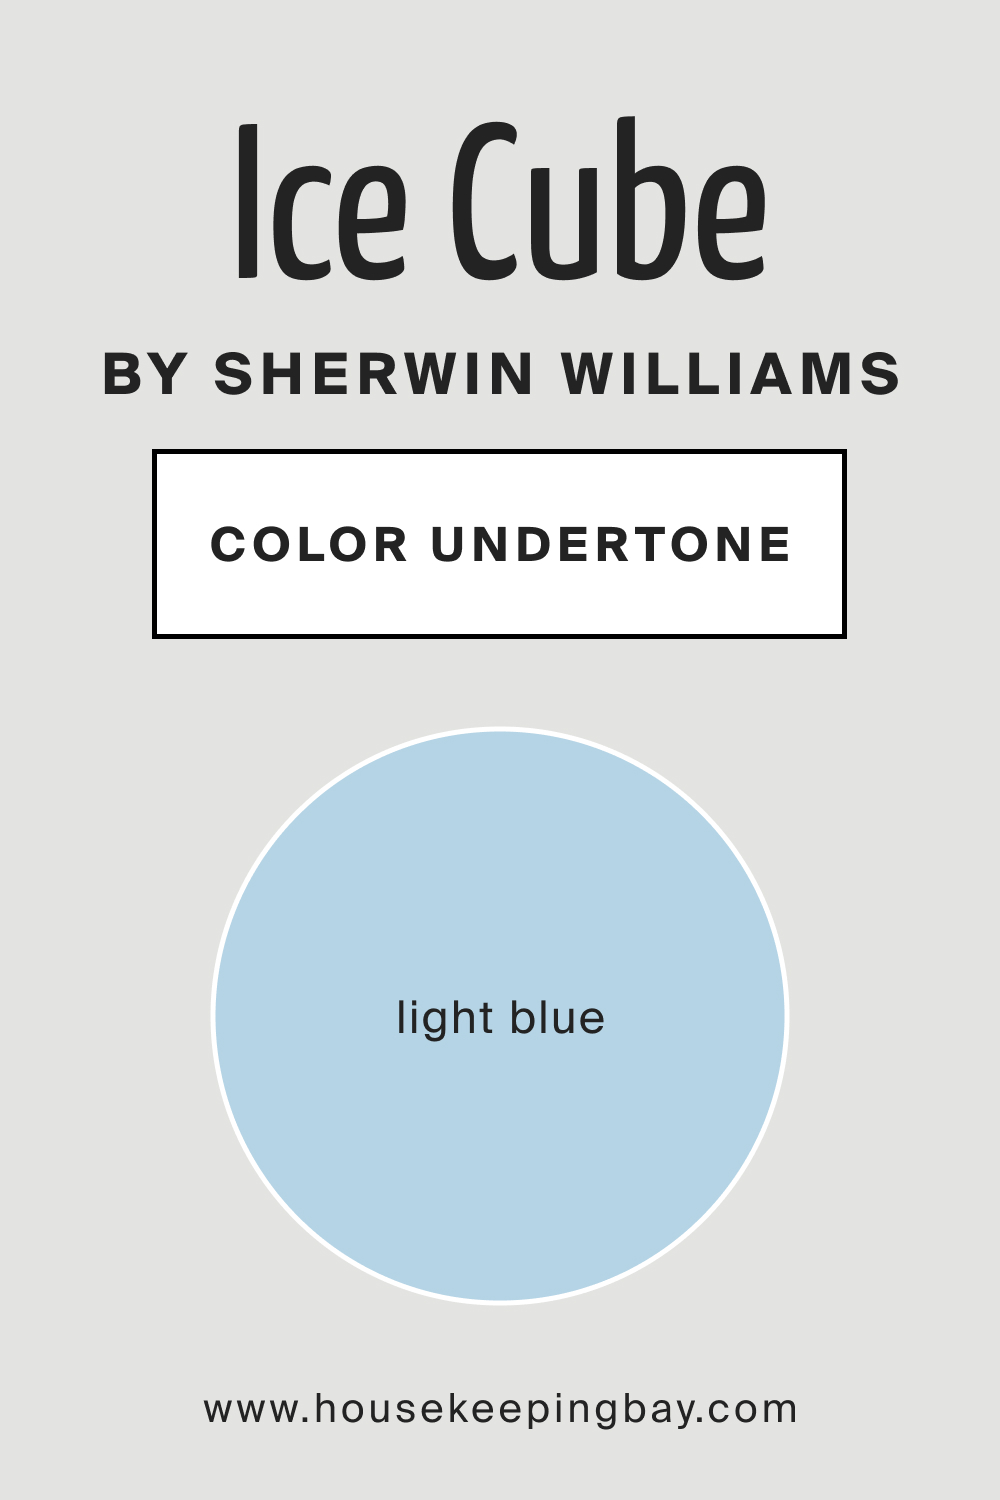 SW 6252 Ice Cube by Sherwin Williams Color Undertone